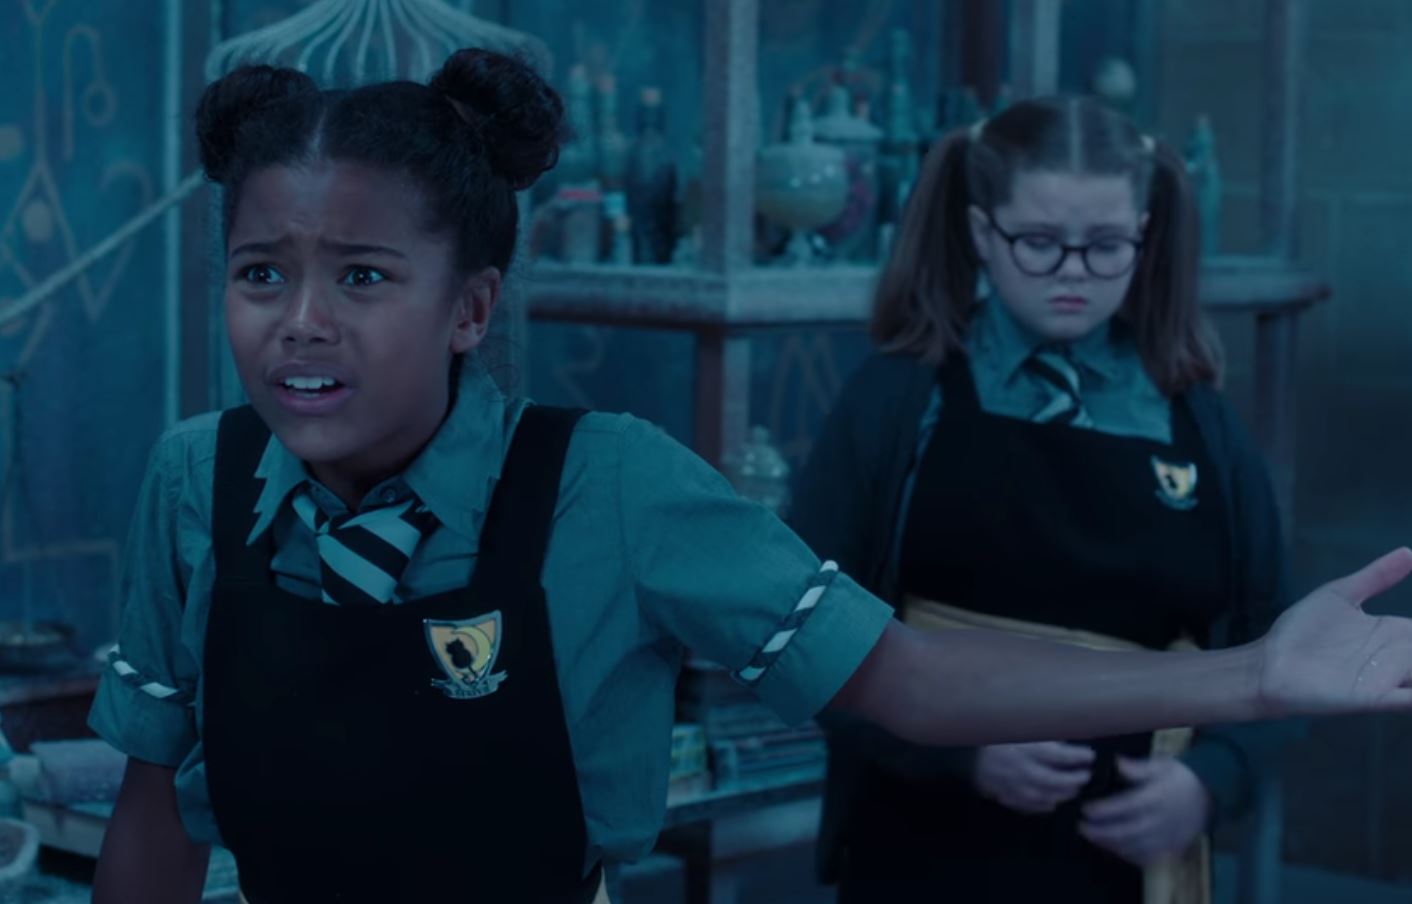 The Worst Witch (TV Series 2017– )